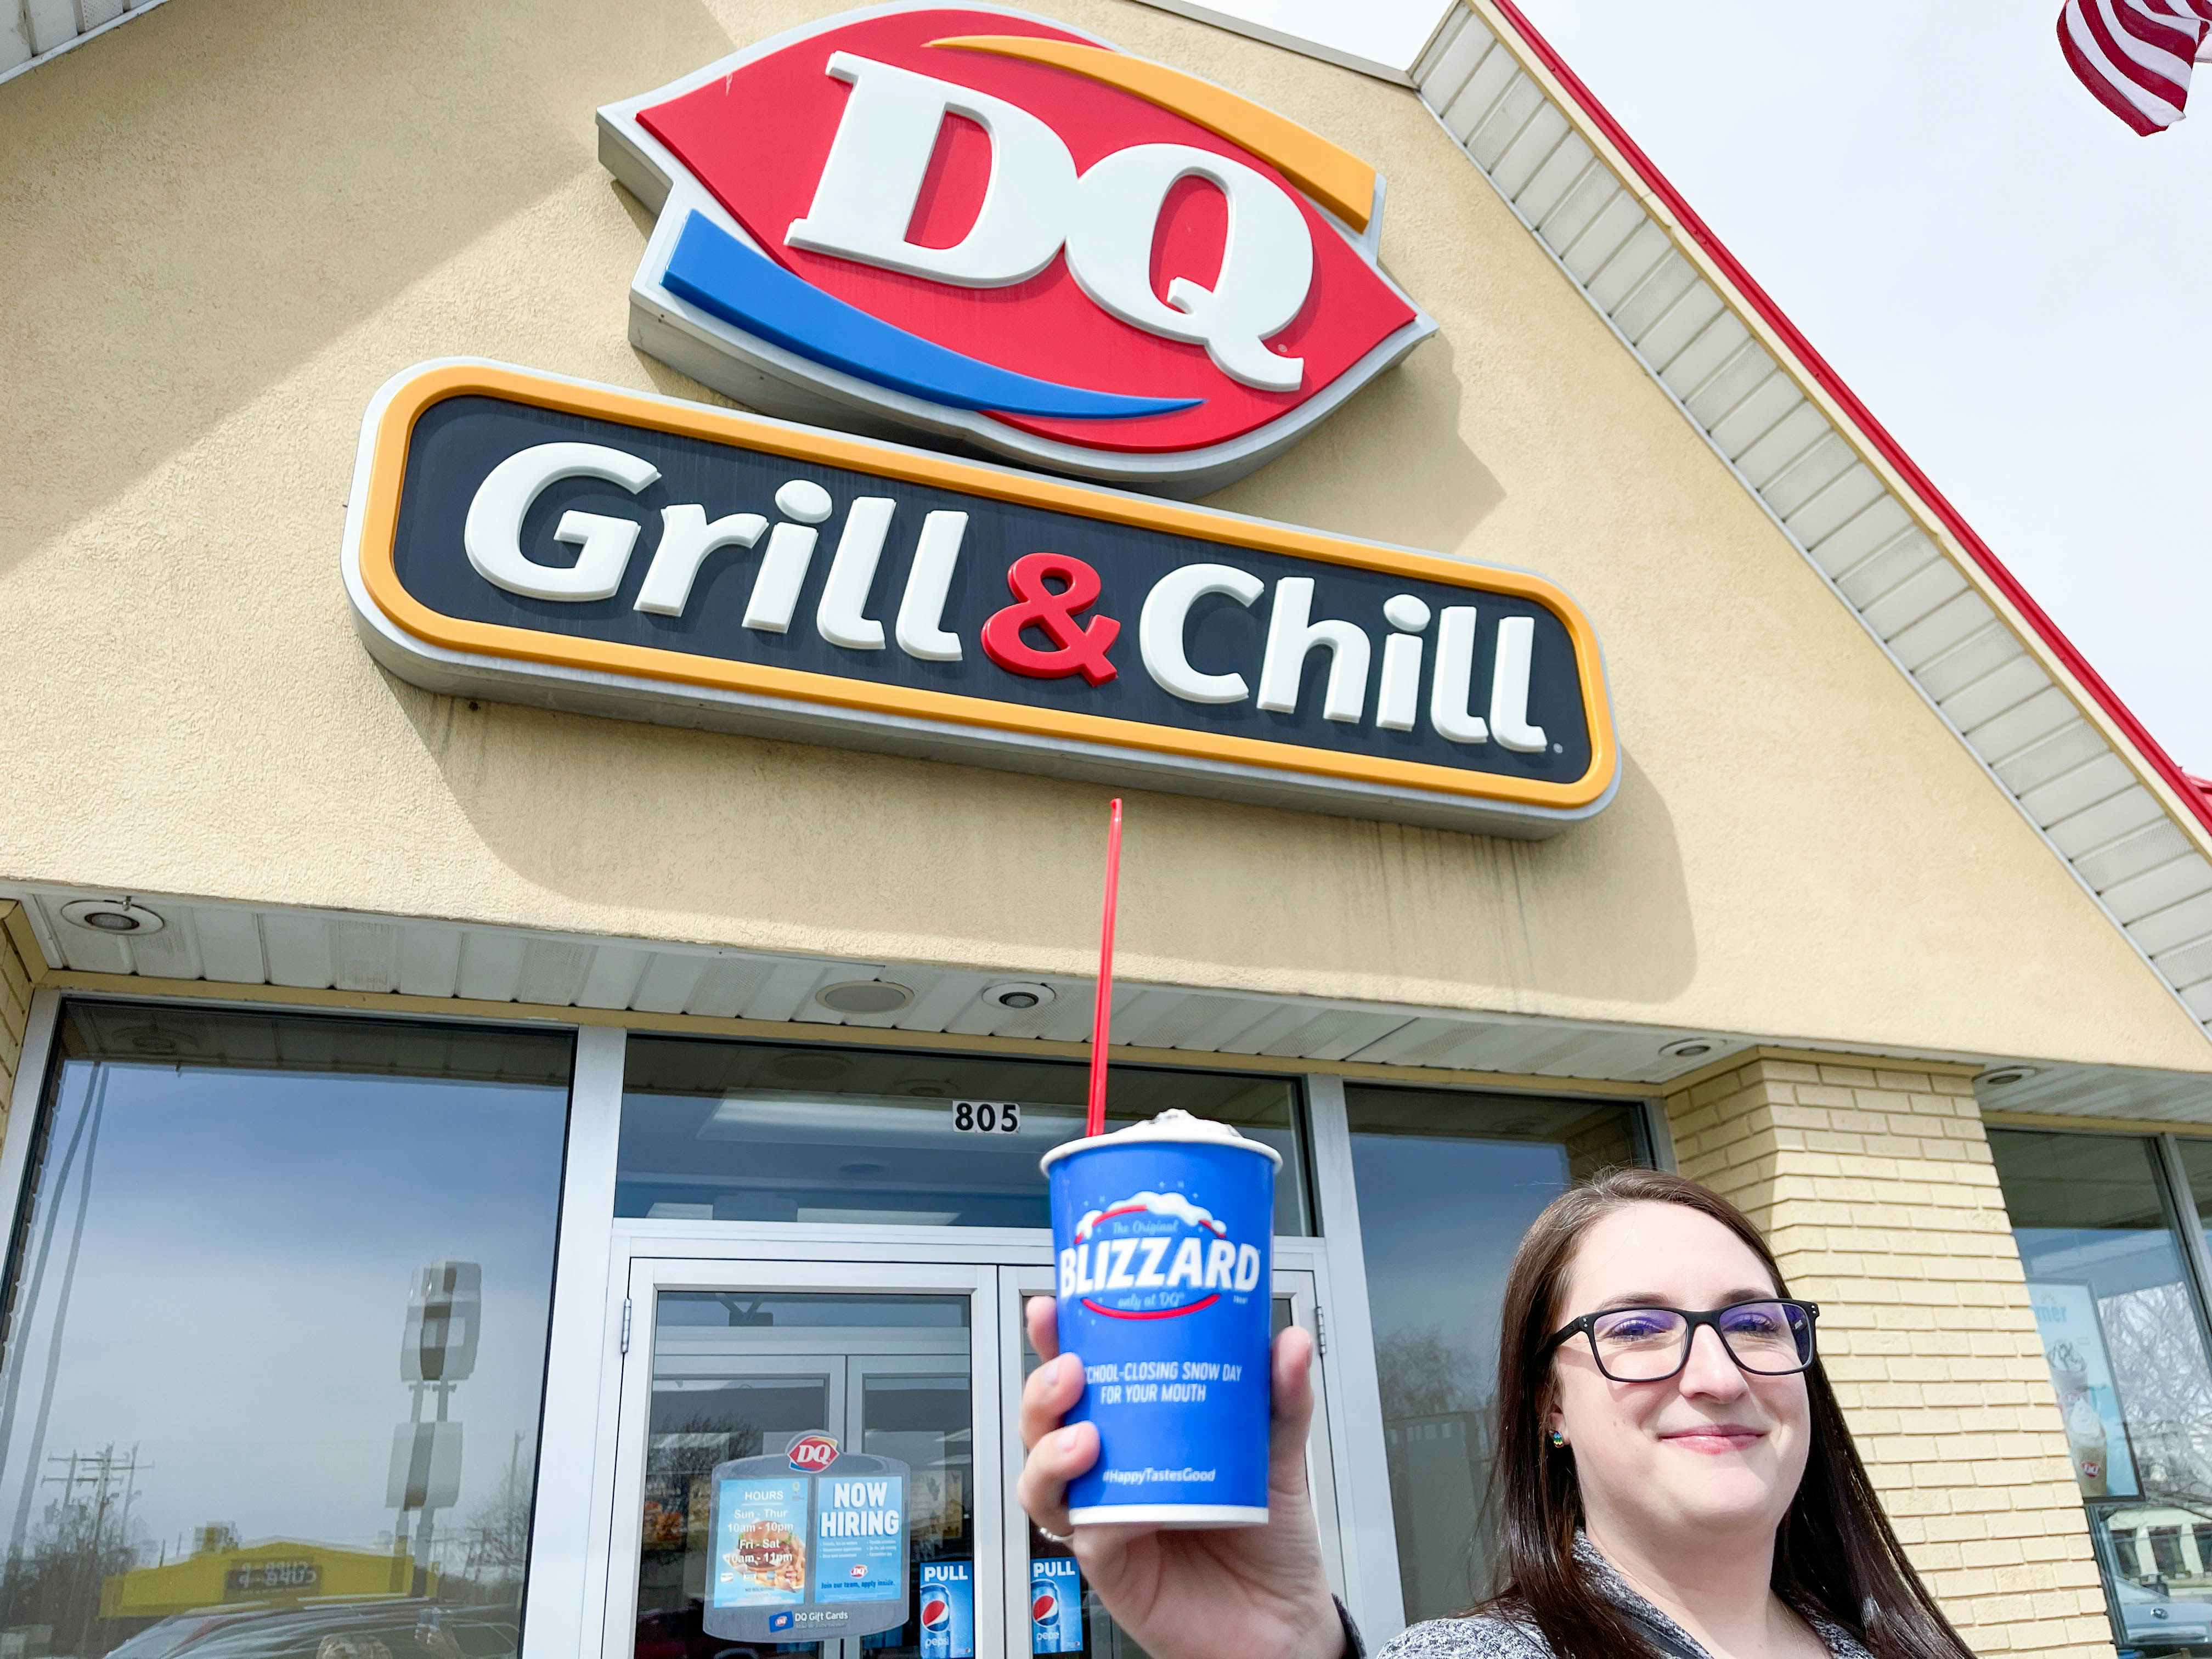 a person standing in front of the dairy queen sign holding up a blizzard